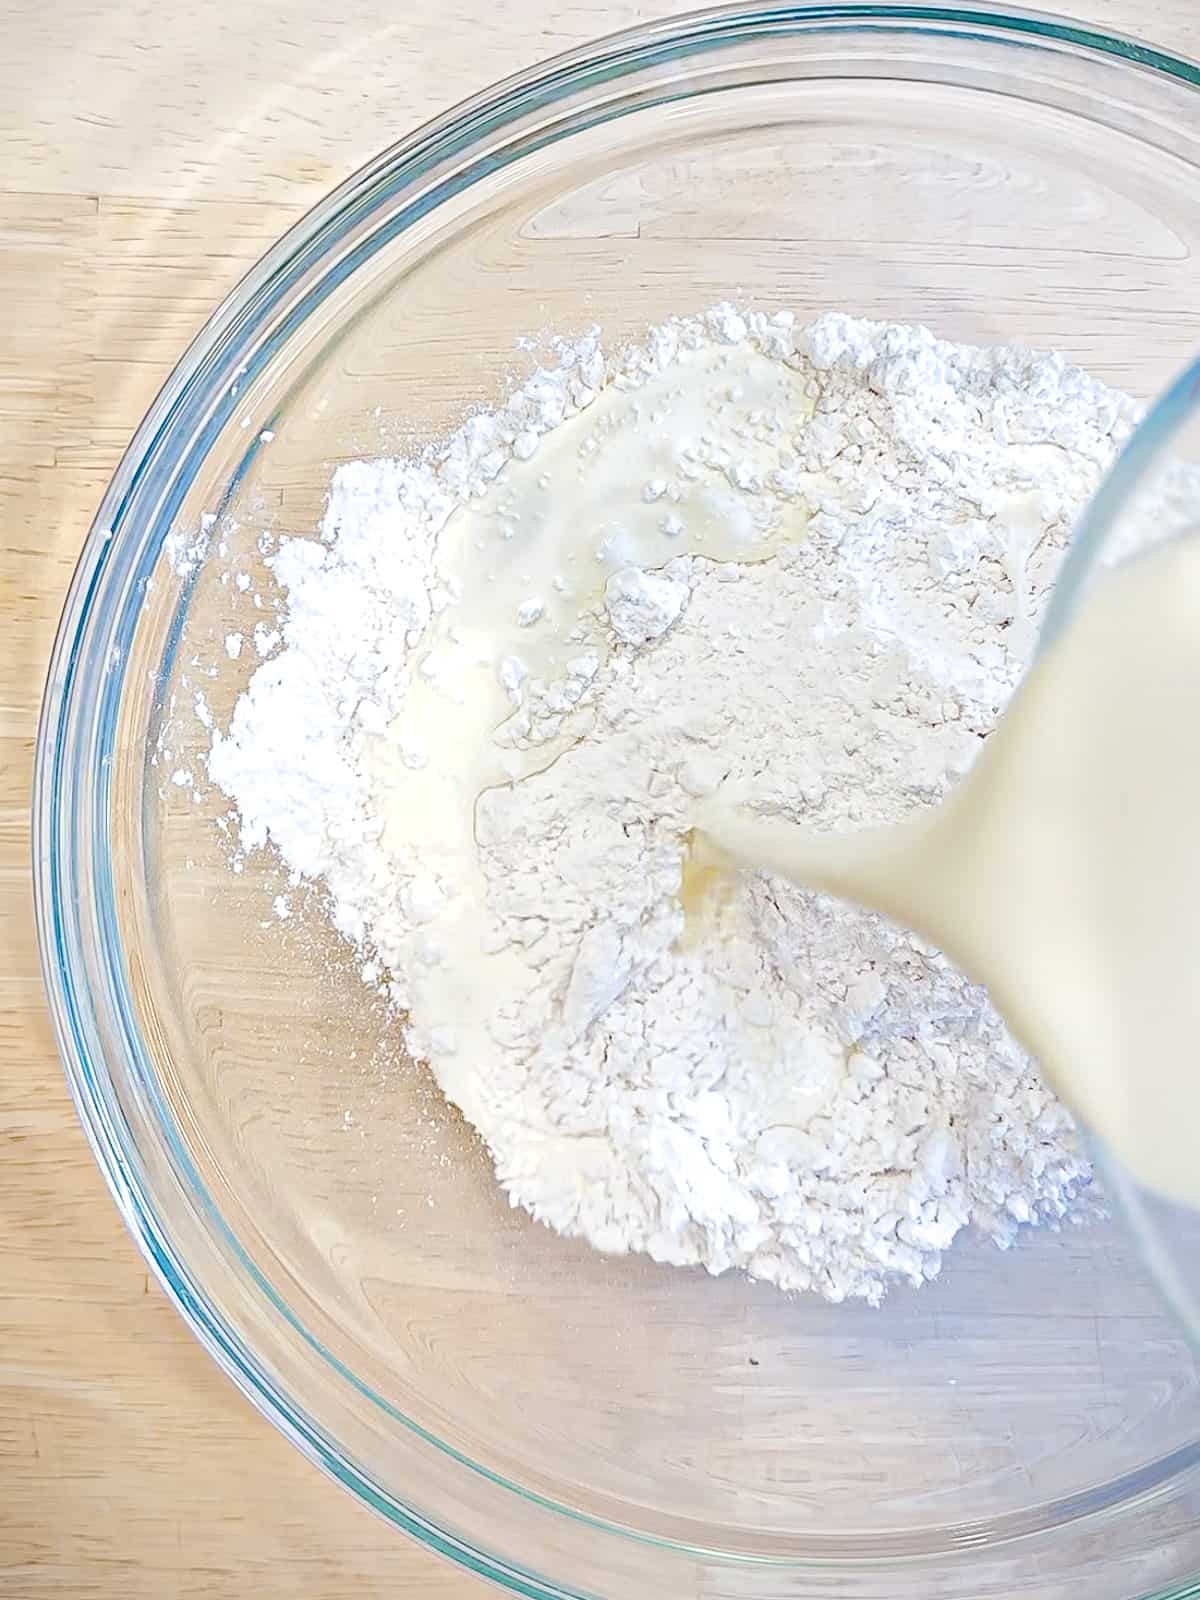 Adding heavy cream to self rising flour, to make biscuits.